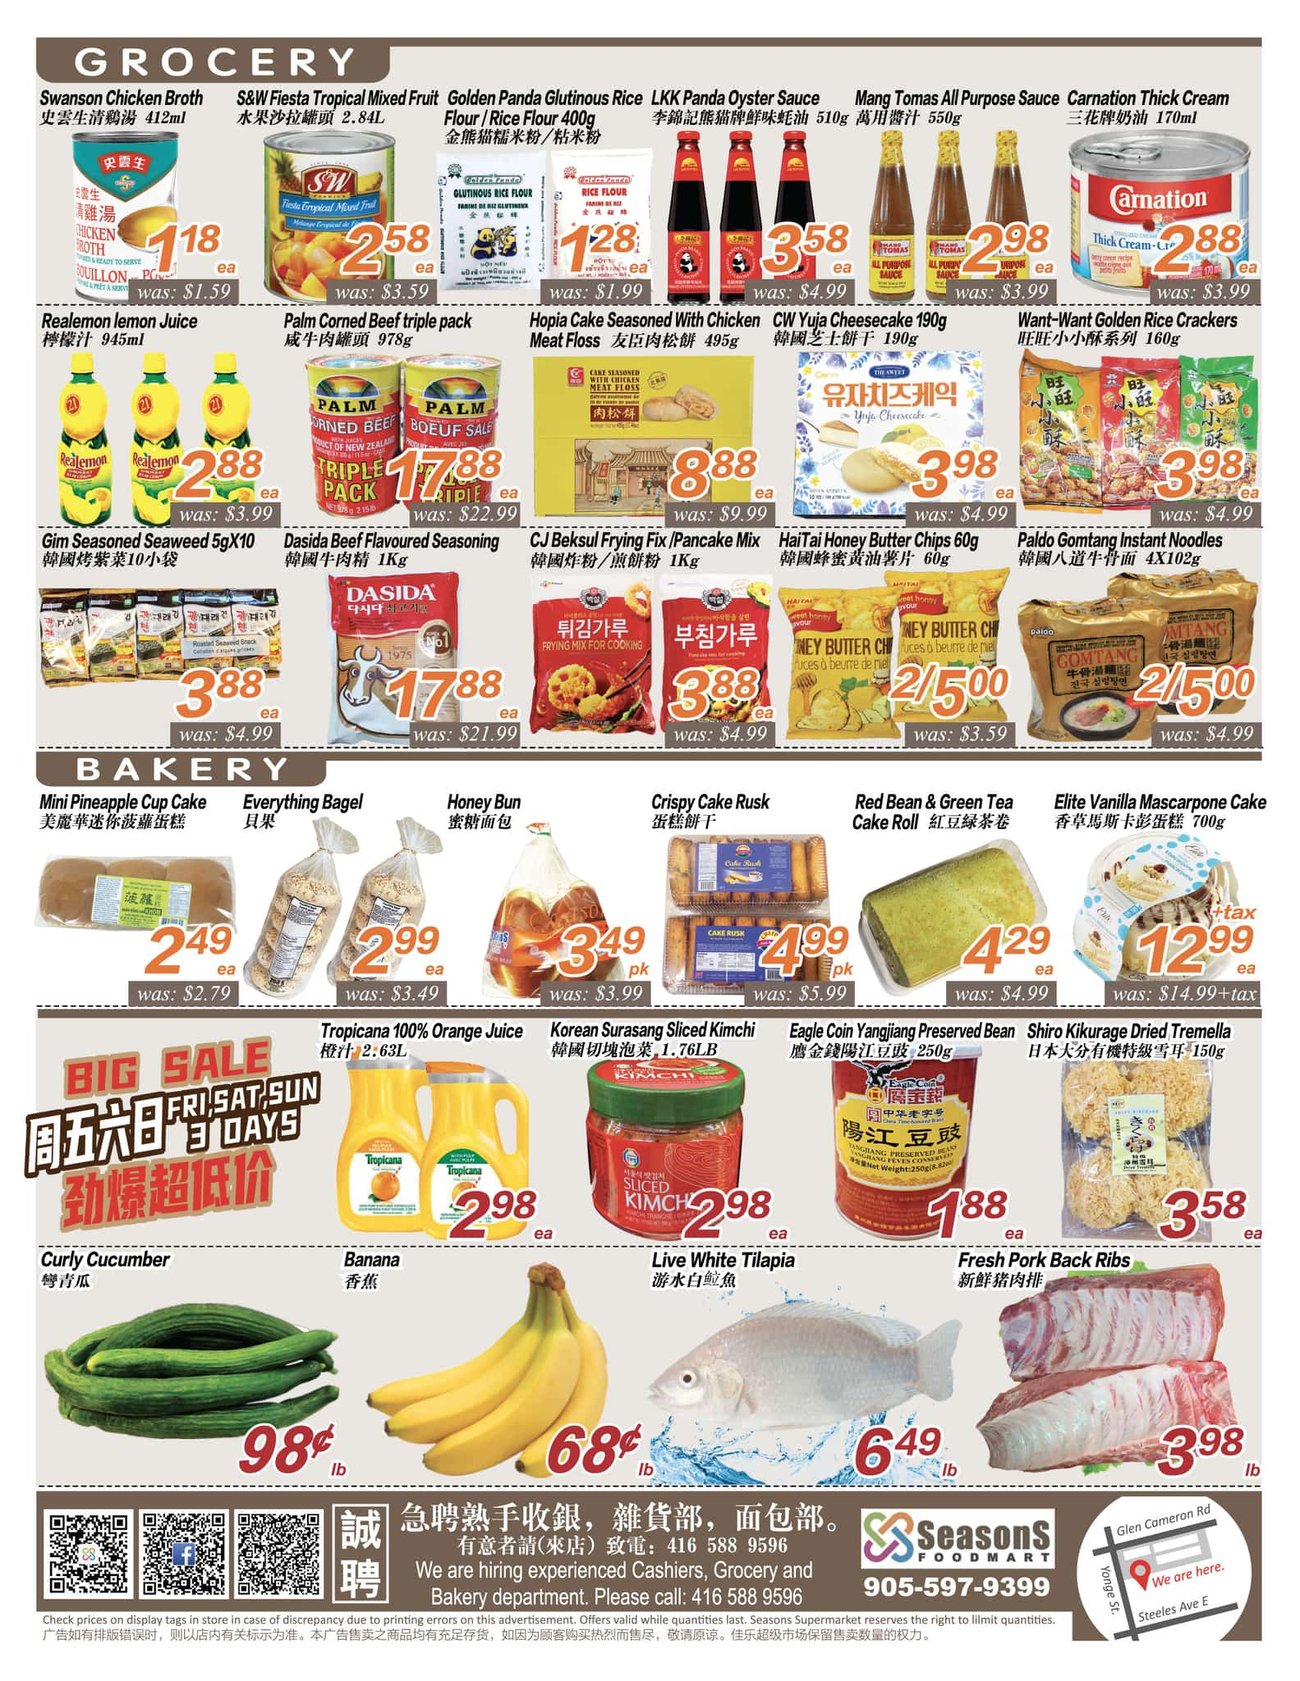 Seasons Foodmart - Thornhill - Weekly Flyer Specials - Page 4